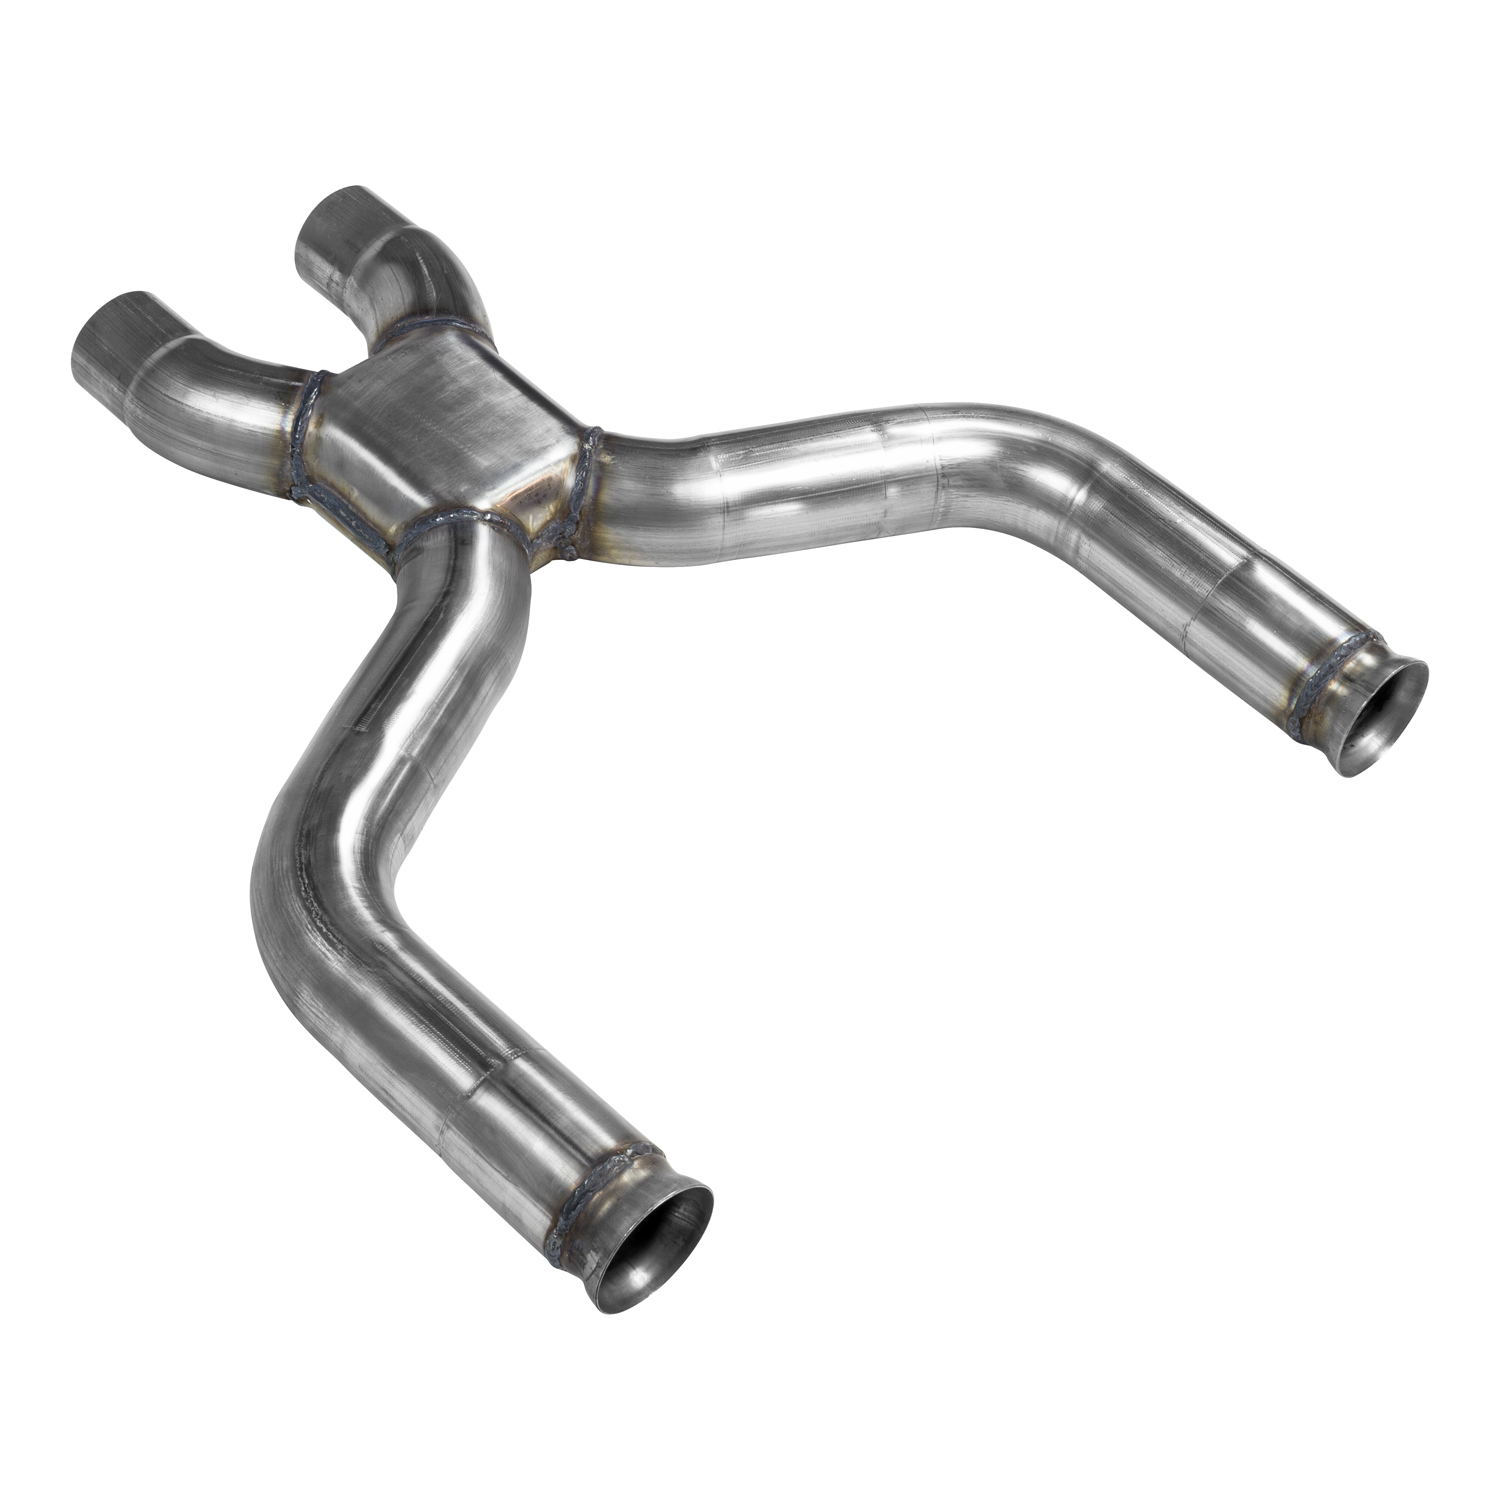 New Outlaw Axle-back exhaust system from Flowmaster is designed for 2014-2017 Corvette C7 Stingray Coupes and Convertibles with the 6.2L engine and 4V Performance NPP Exhaust Option